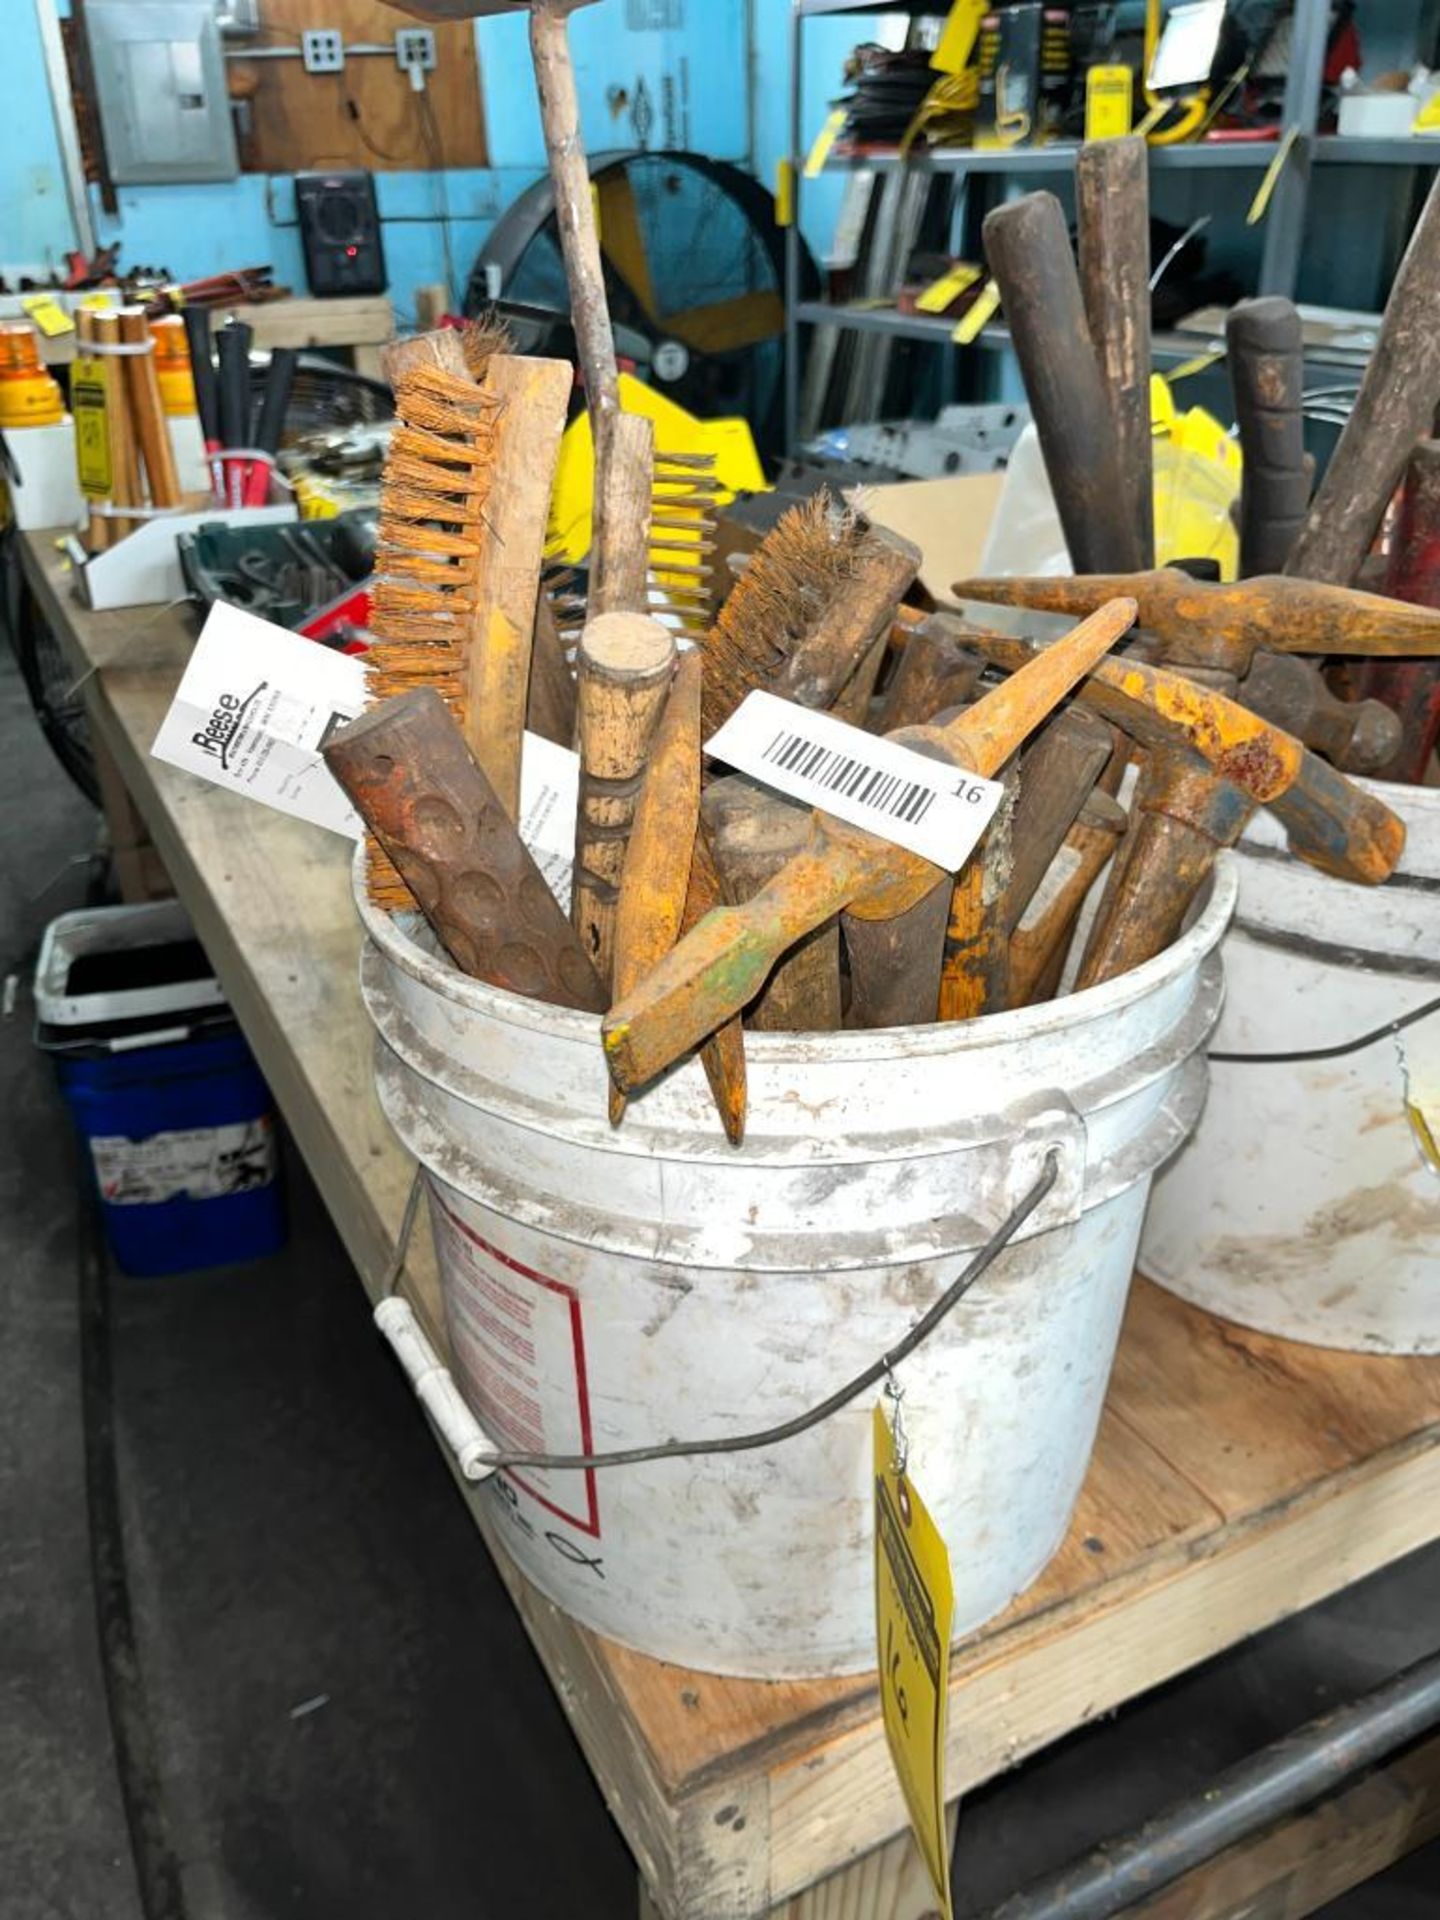 Bucket of Pick Axes, Brushes, & Assorted